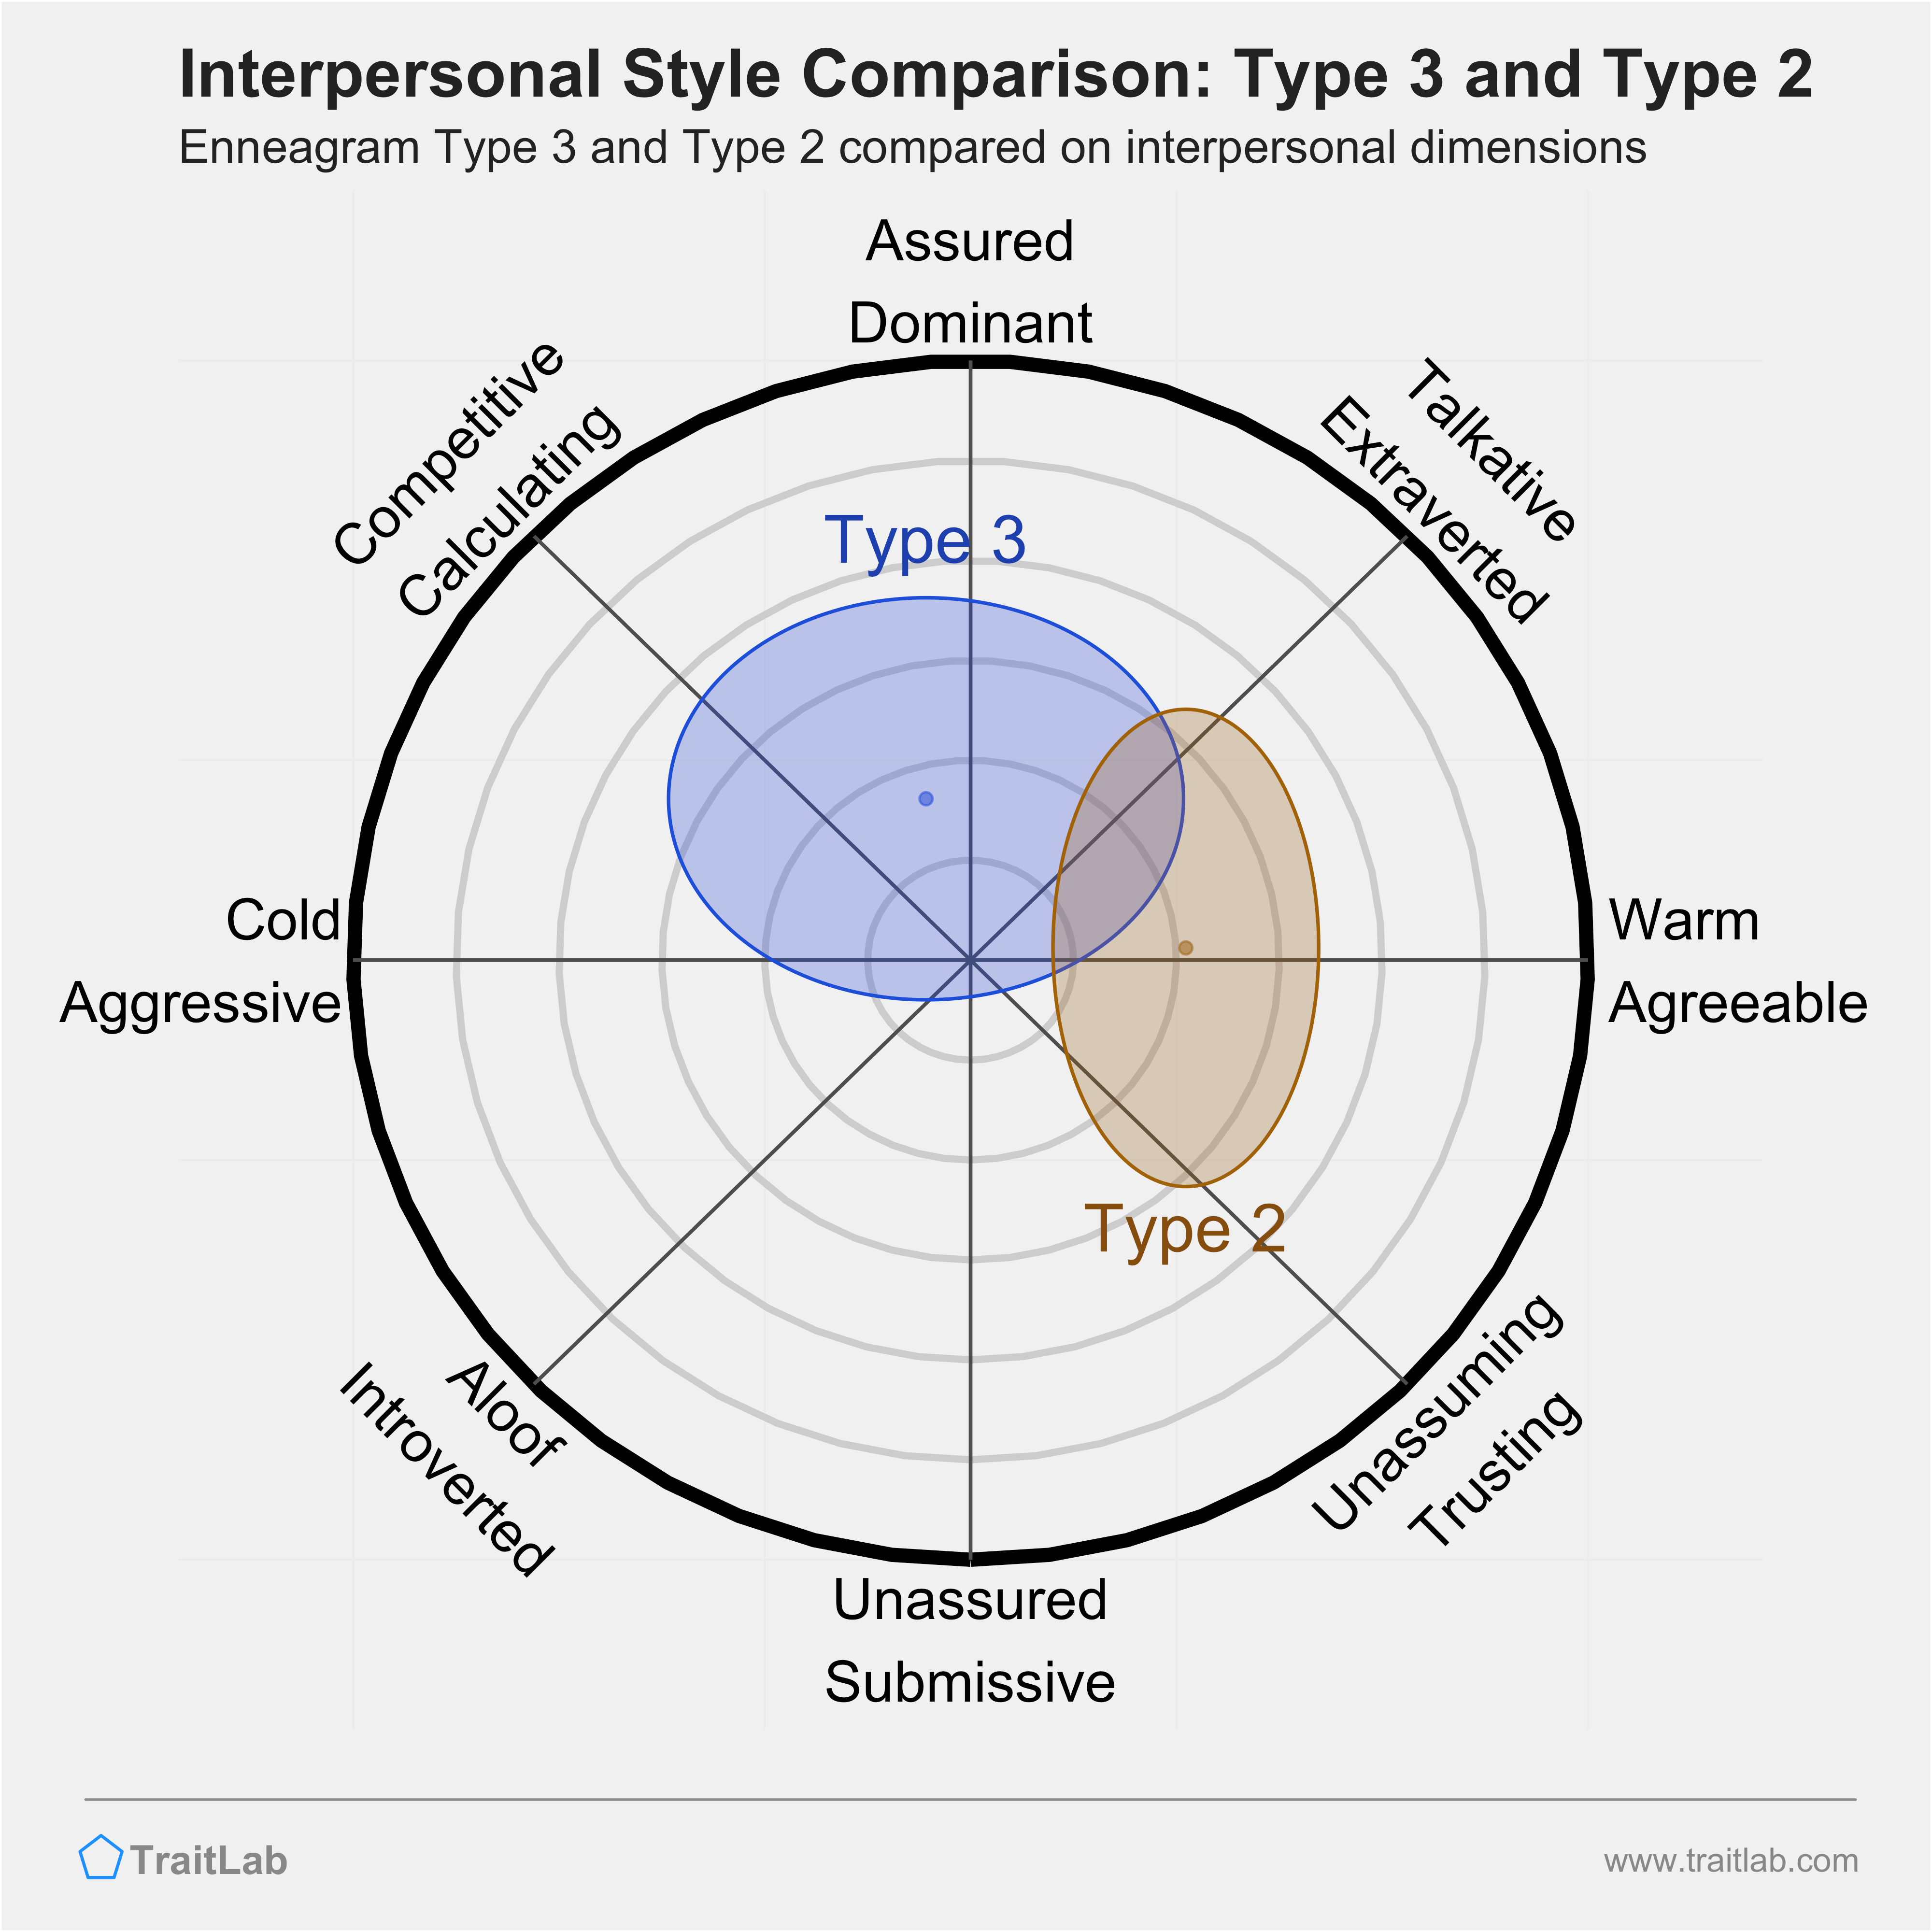 Enneagram Type 3 and Type 2 comparison across interpersonal dimensions